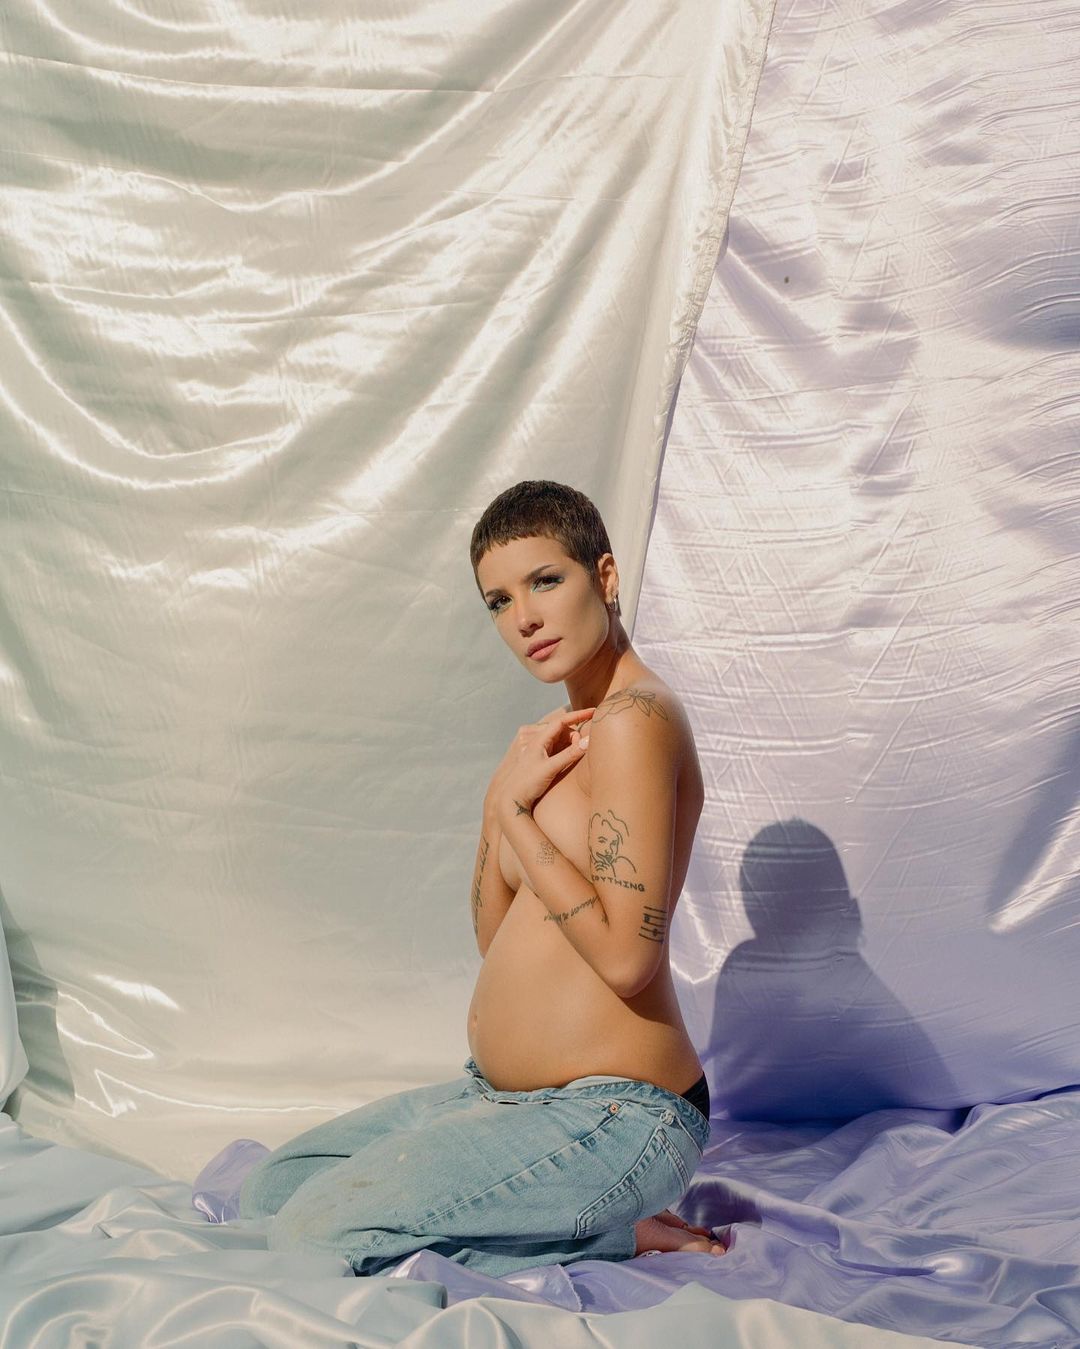 Pregnant Posing Nude - Halsey Joins Celebrities Who Posed Topless And Nude When Pregnant